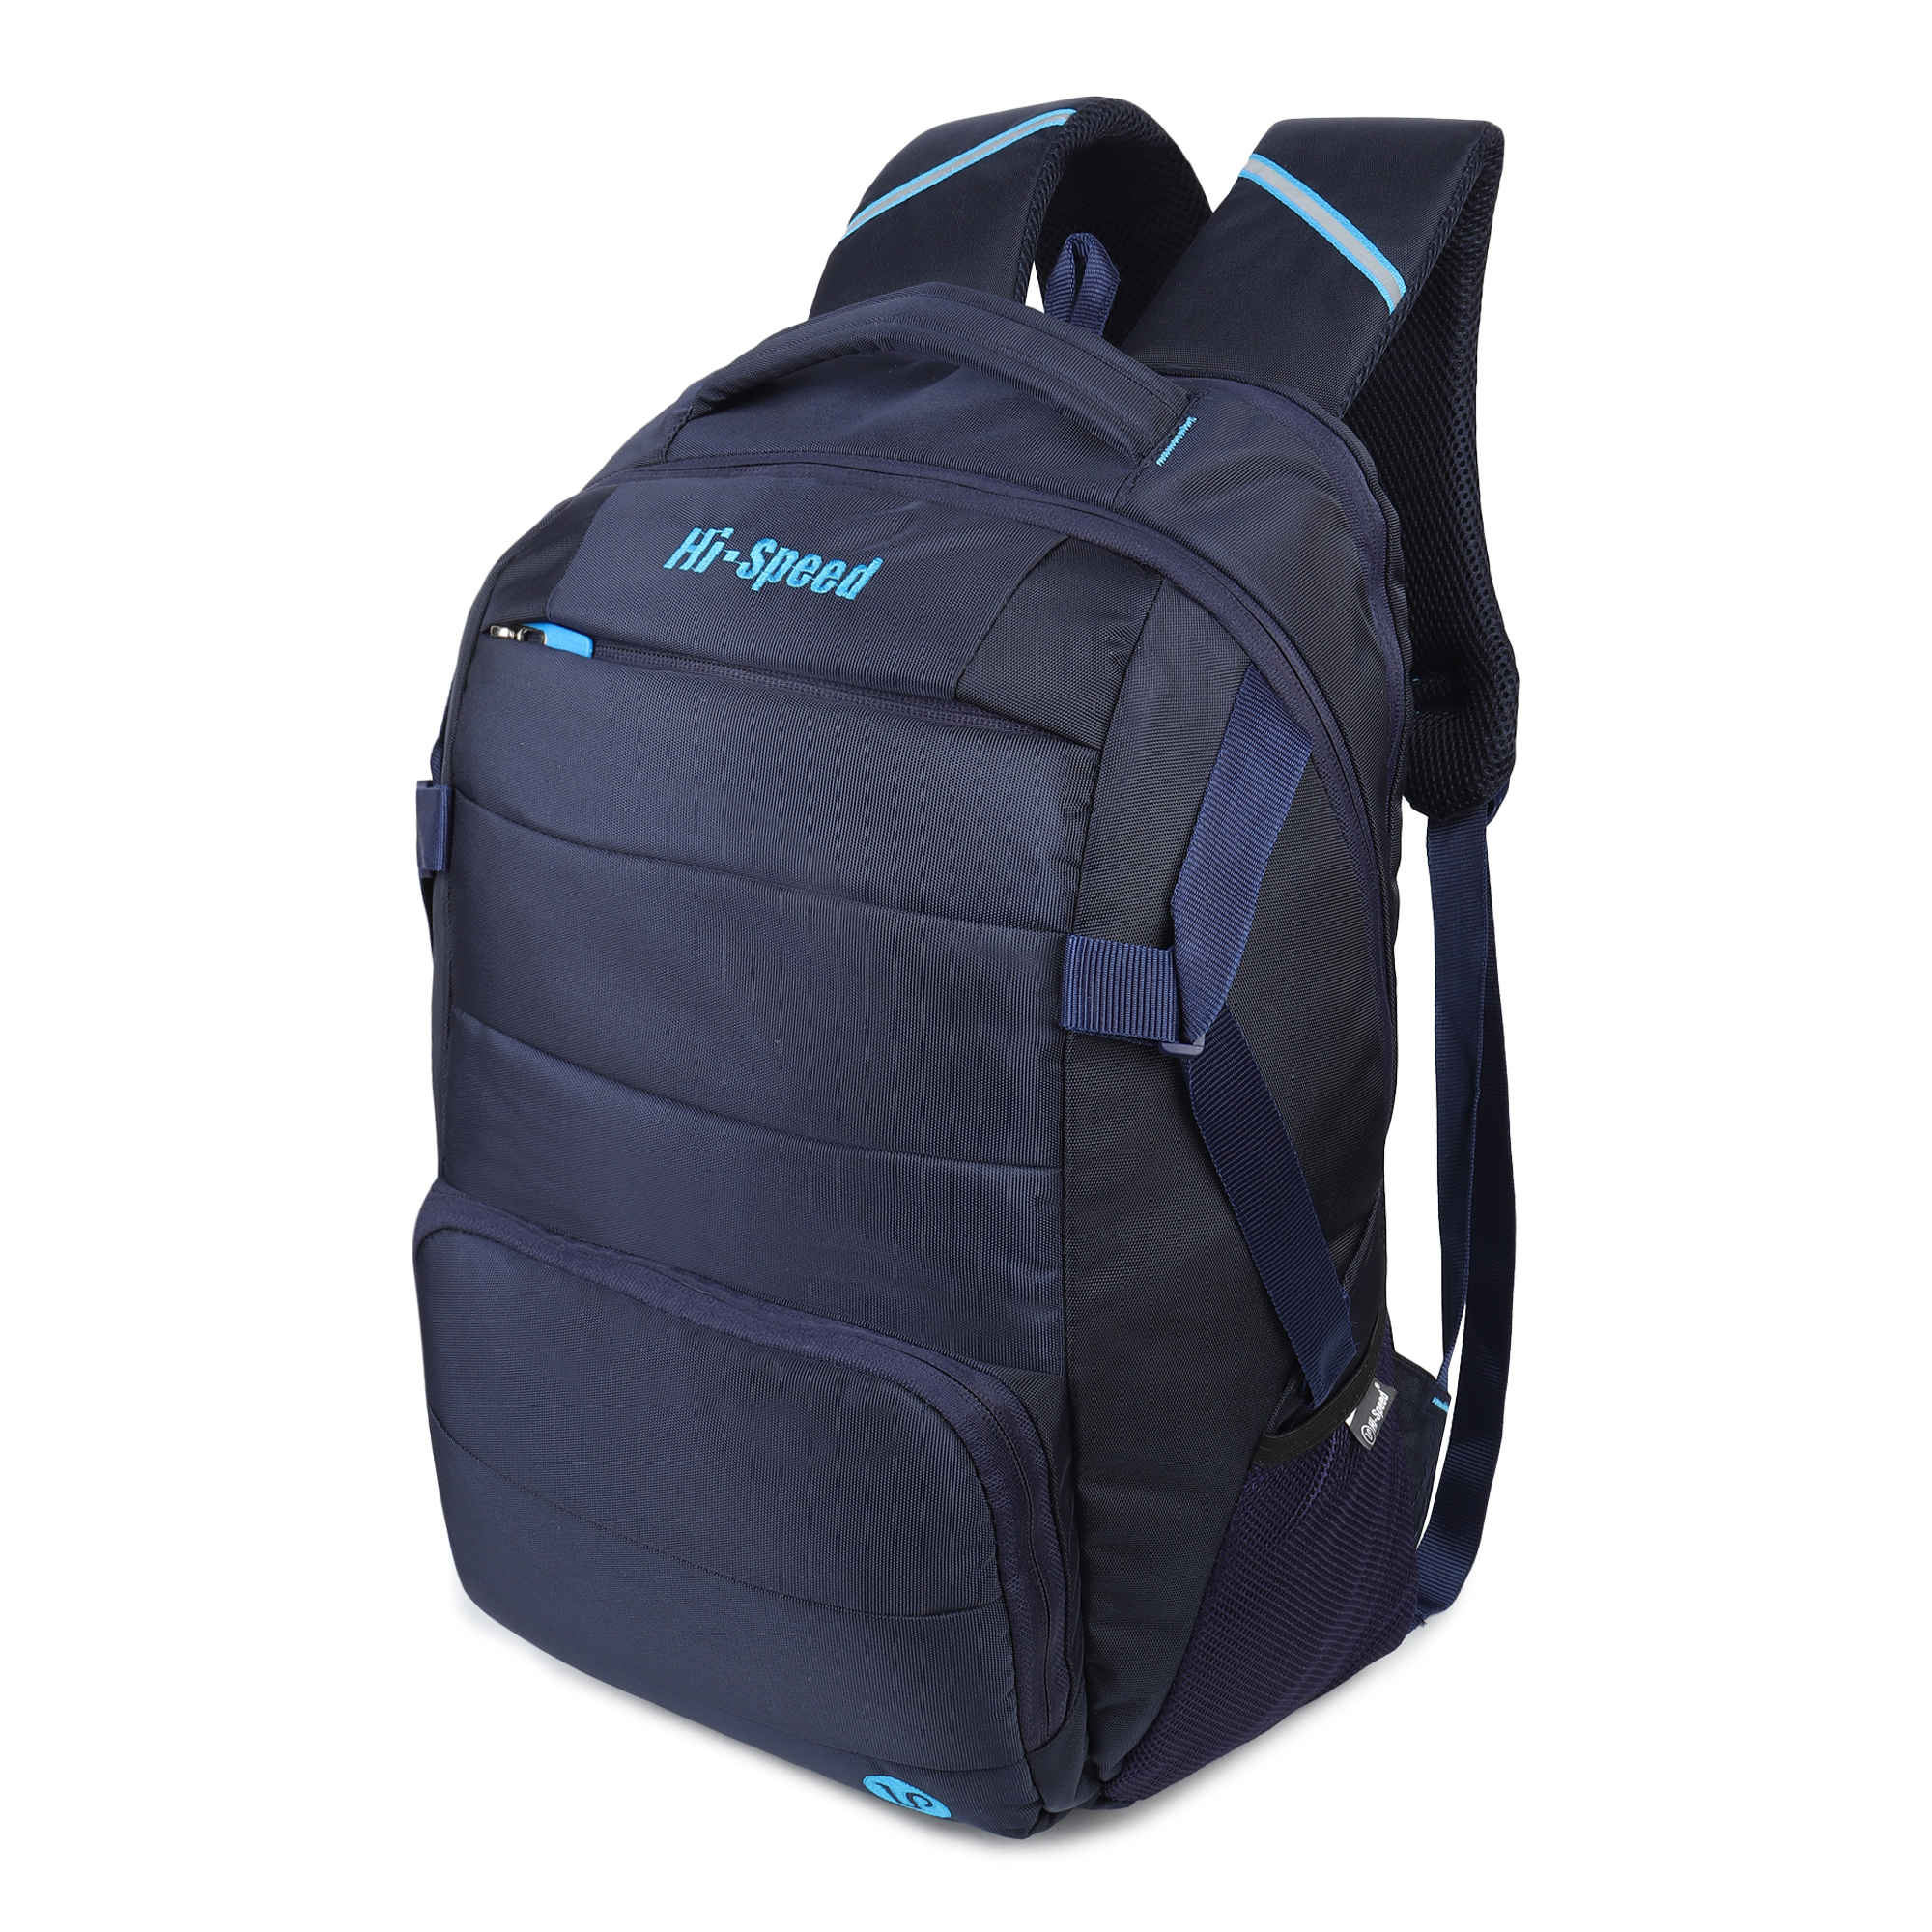 Hi-speed bags aptop Compartment:Padded compartments designed to ...